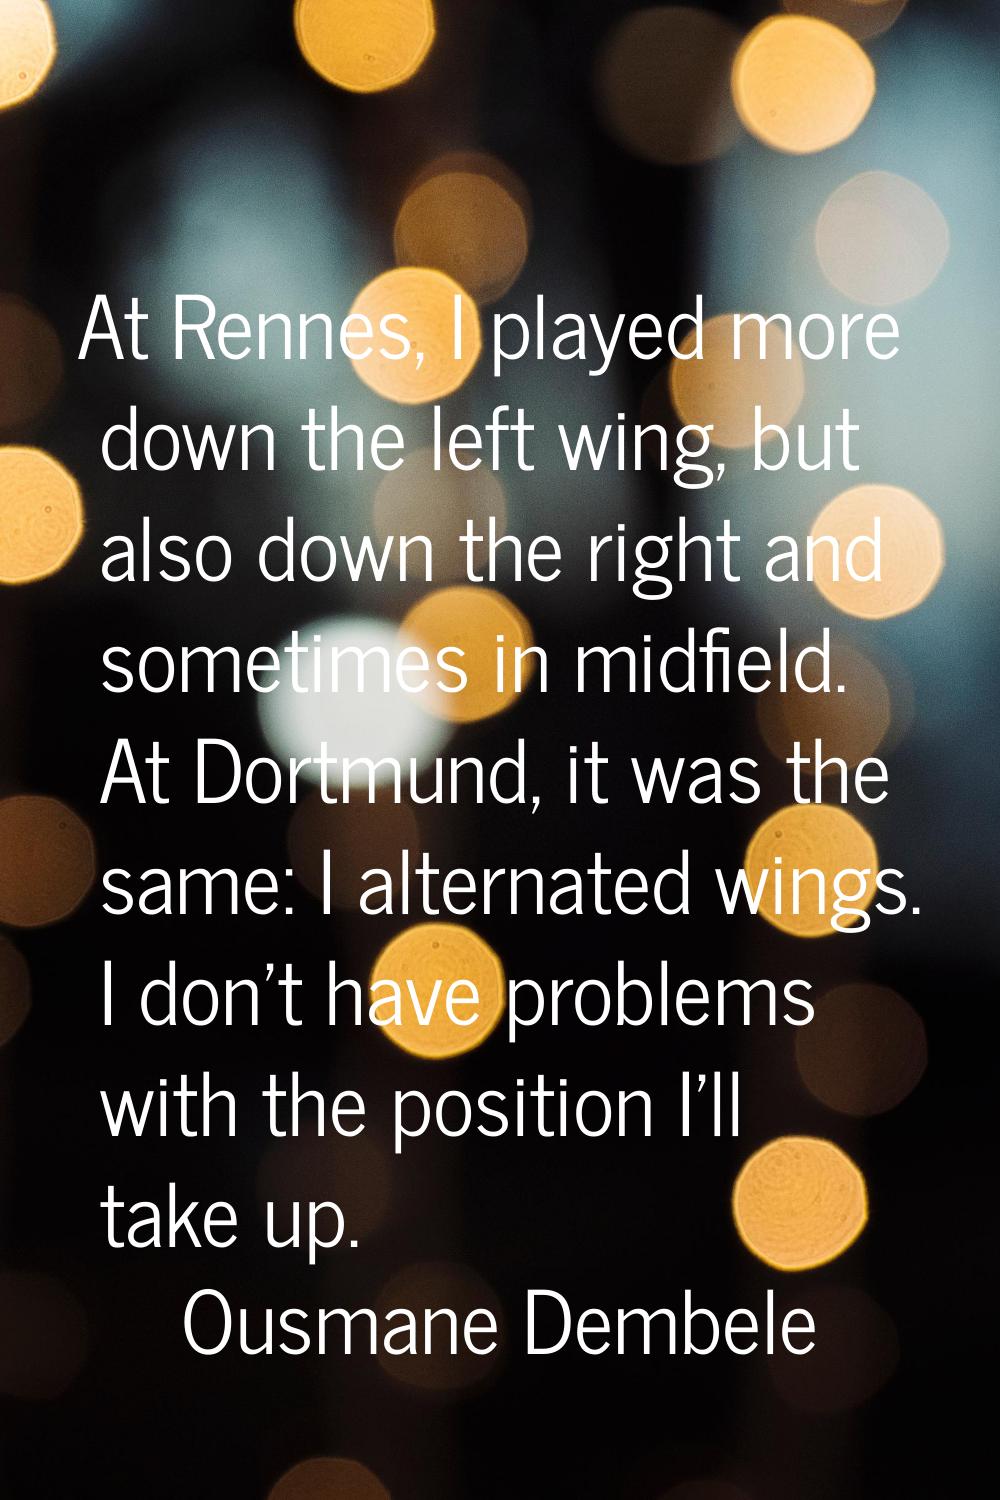 At Rennes, I played more down the left wing, but also down the right and sometimes in midfield. At 